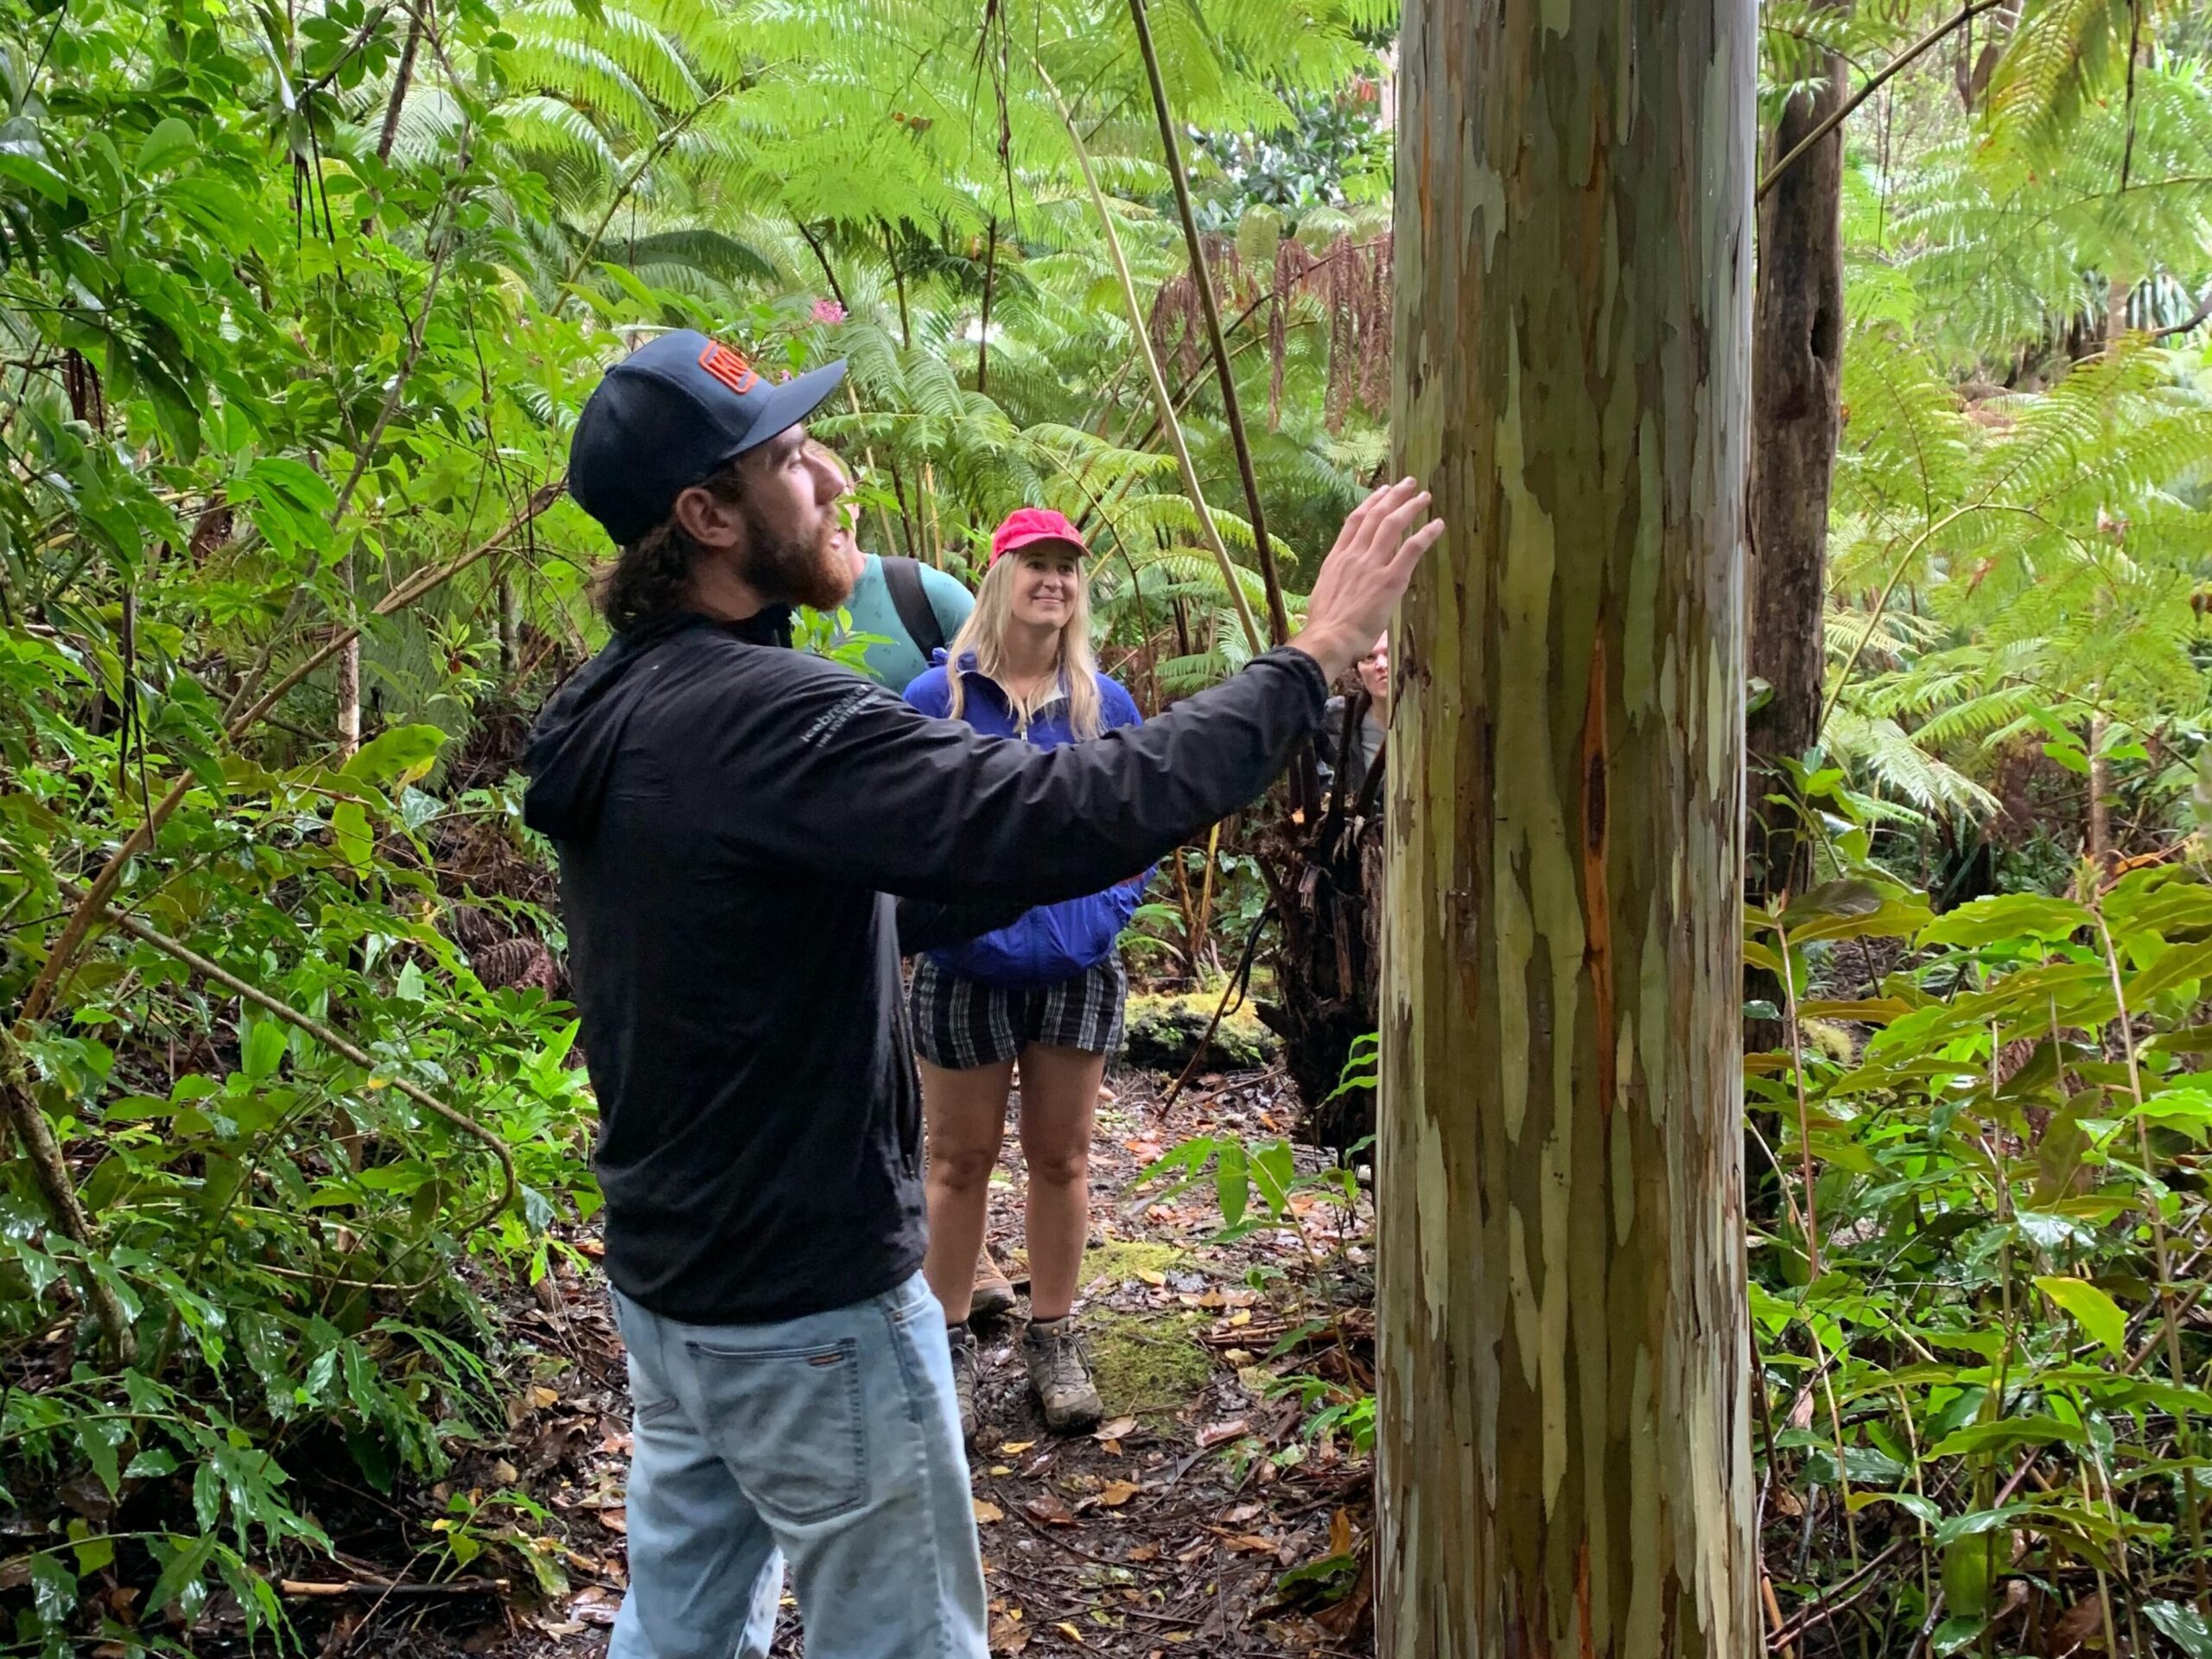 A group of people admiring a young rainbow eucalyptus tree